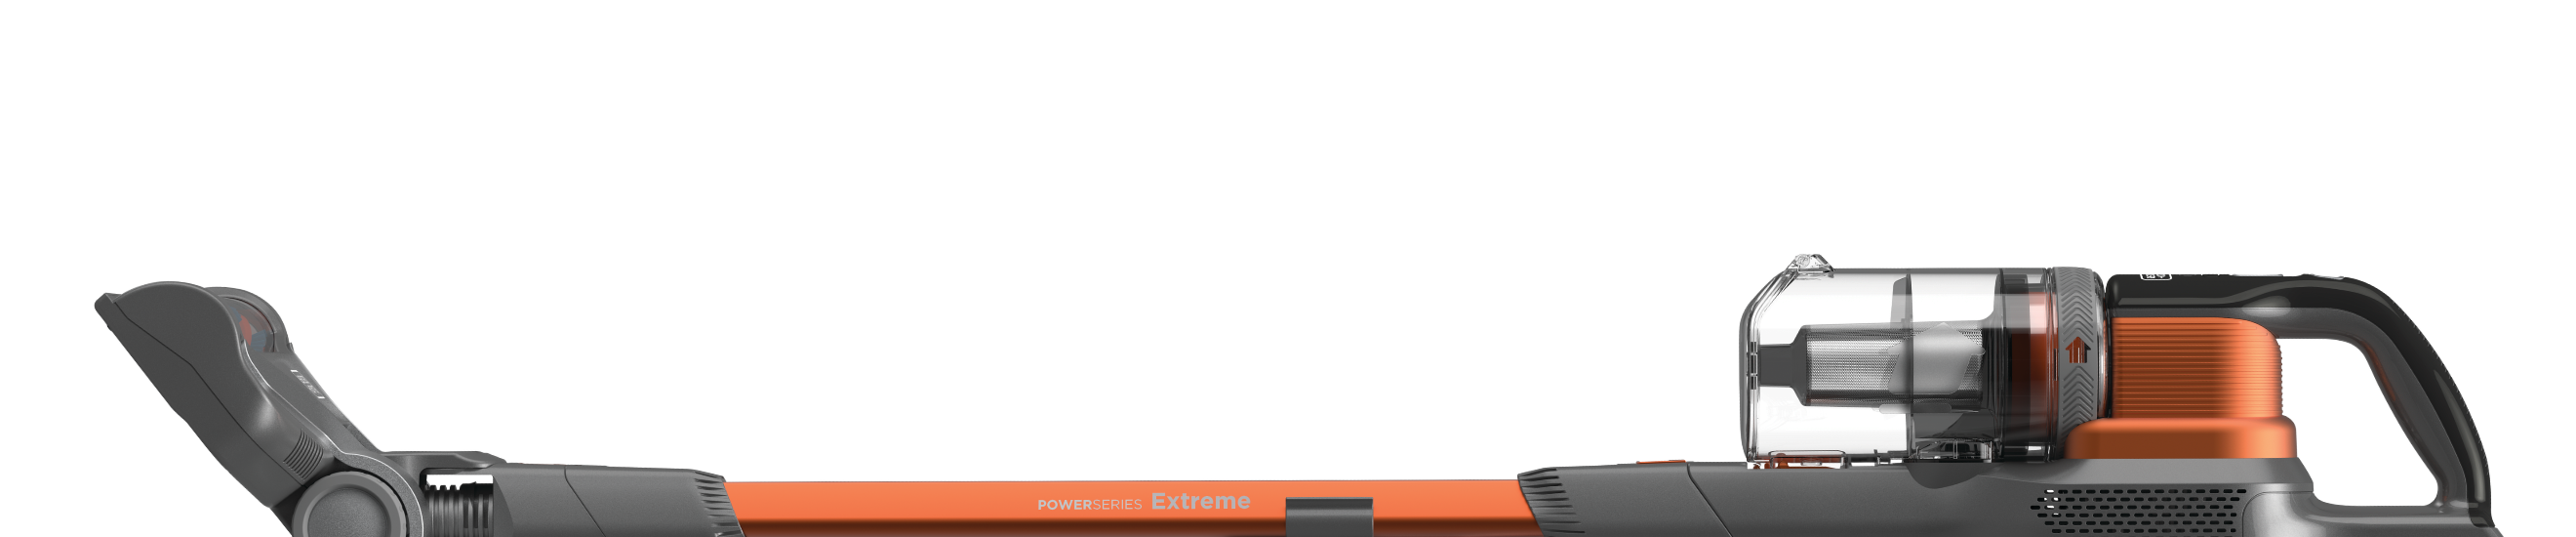 BLACK+DECKER POWERSERIES Extreme Cordless Bagless Power Stick Vacuum  Cleaner BSV2020 - The Home Depot